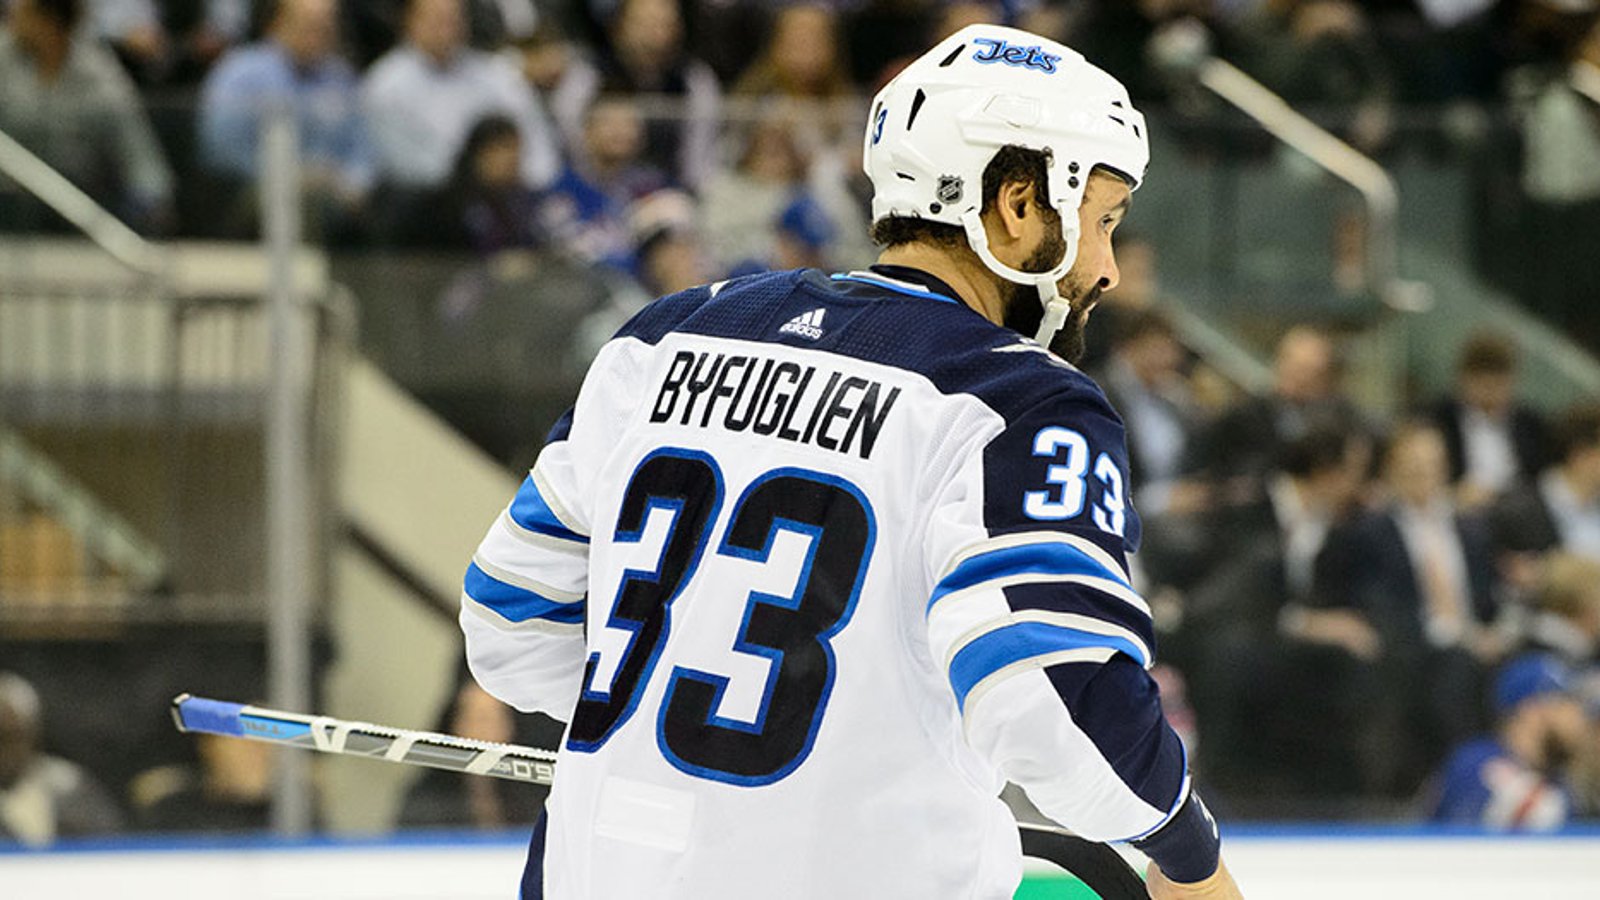 Breaking: Another update in the Byfuglien situation with Jets